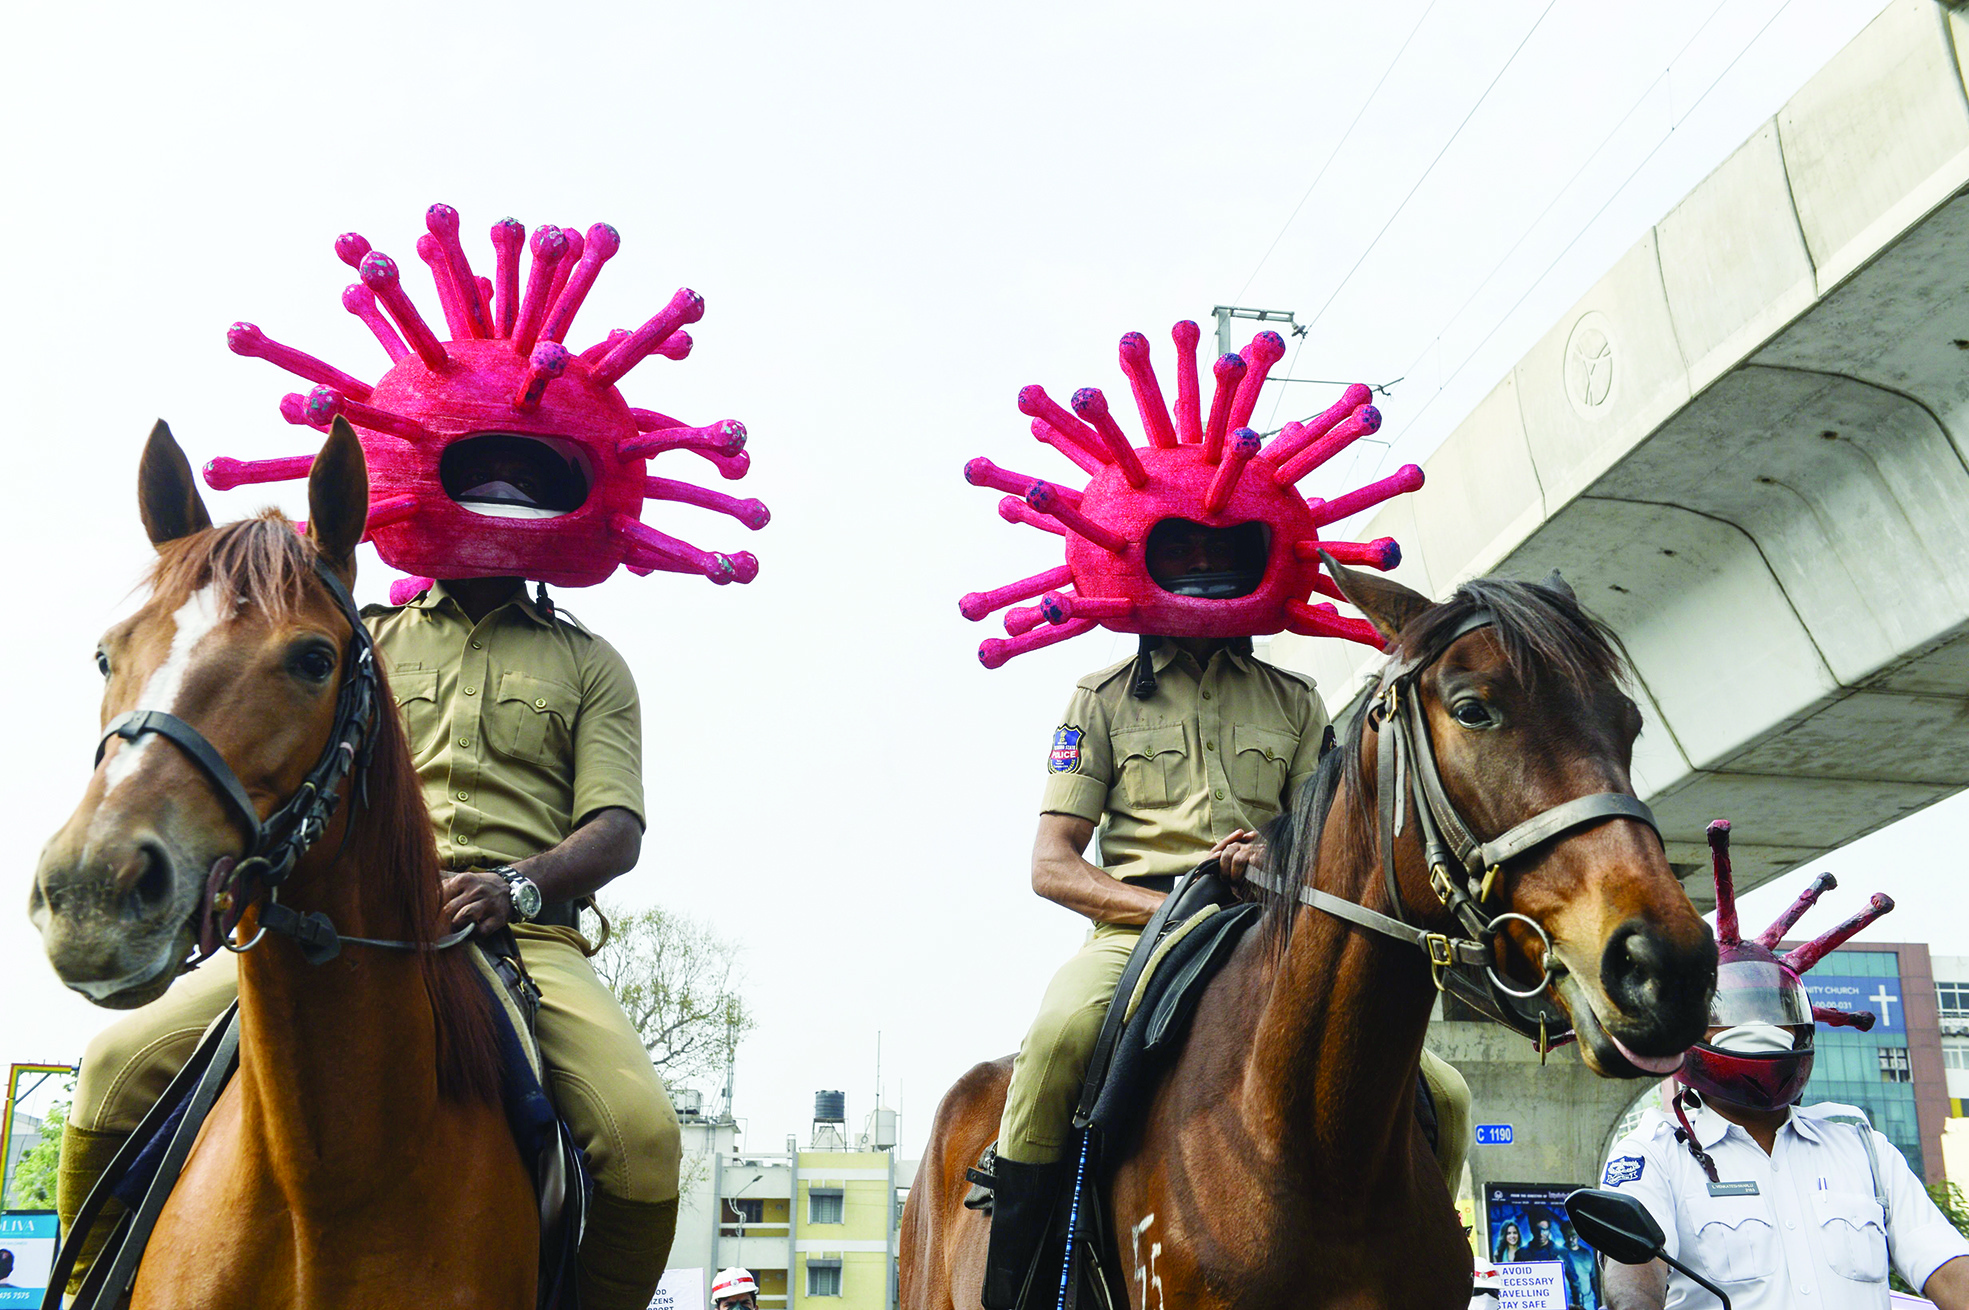 TOPSHOT - Police personnel wearing coronavirus-themed helmets ride on horses as they participate in a awareness campaign during a 21-day government-imposed nationwide lockdown as a preventive measure against the COVID-19 coronavirus in Secunderabad, the twin city of Hyderabad, on April 2, 2020. (Photo by NOAH SEELAM / AFP)